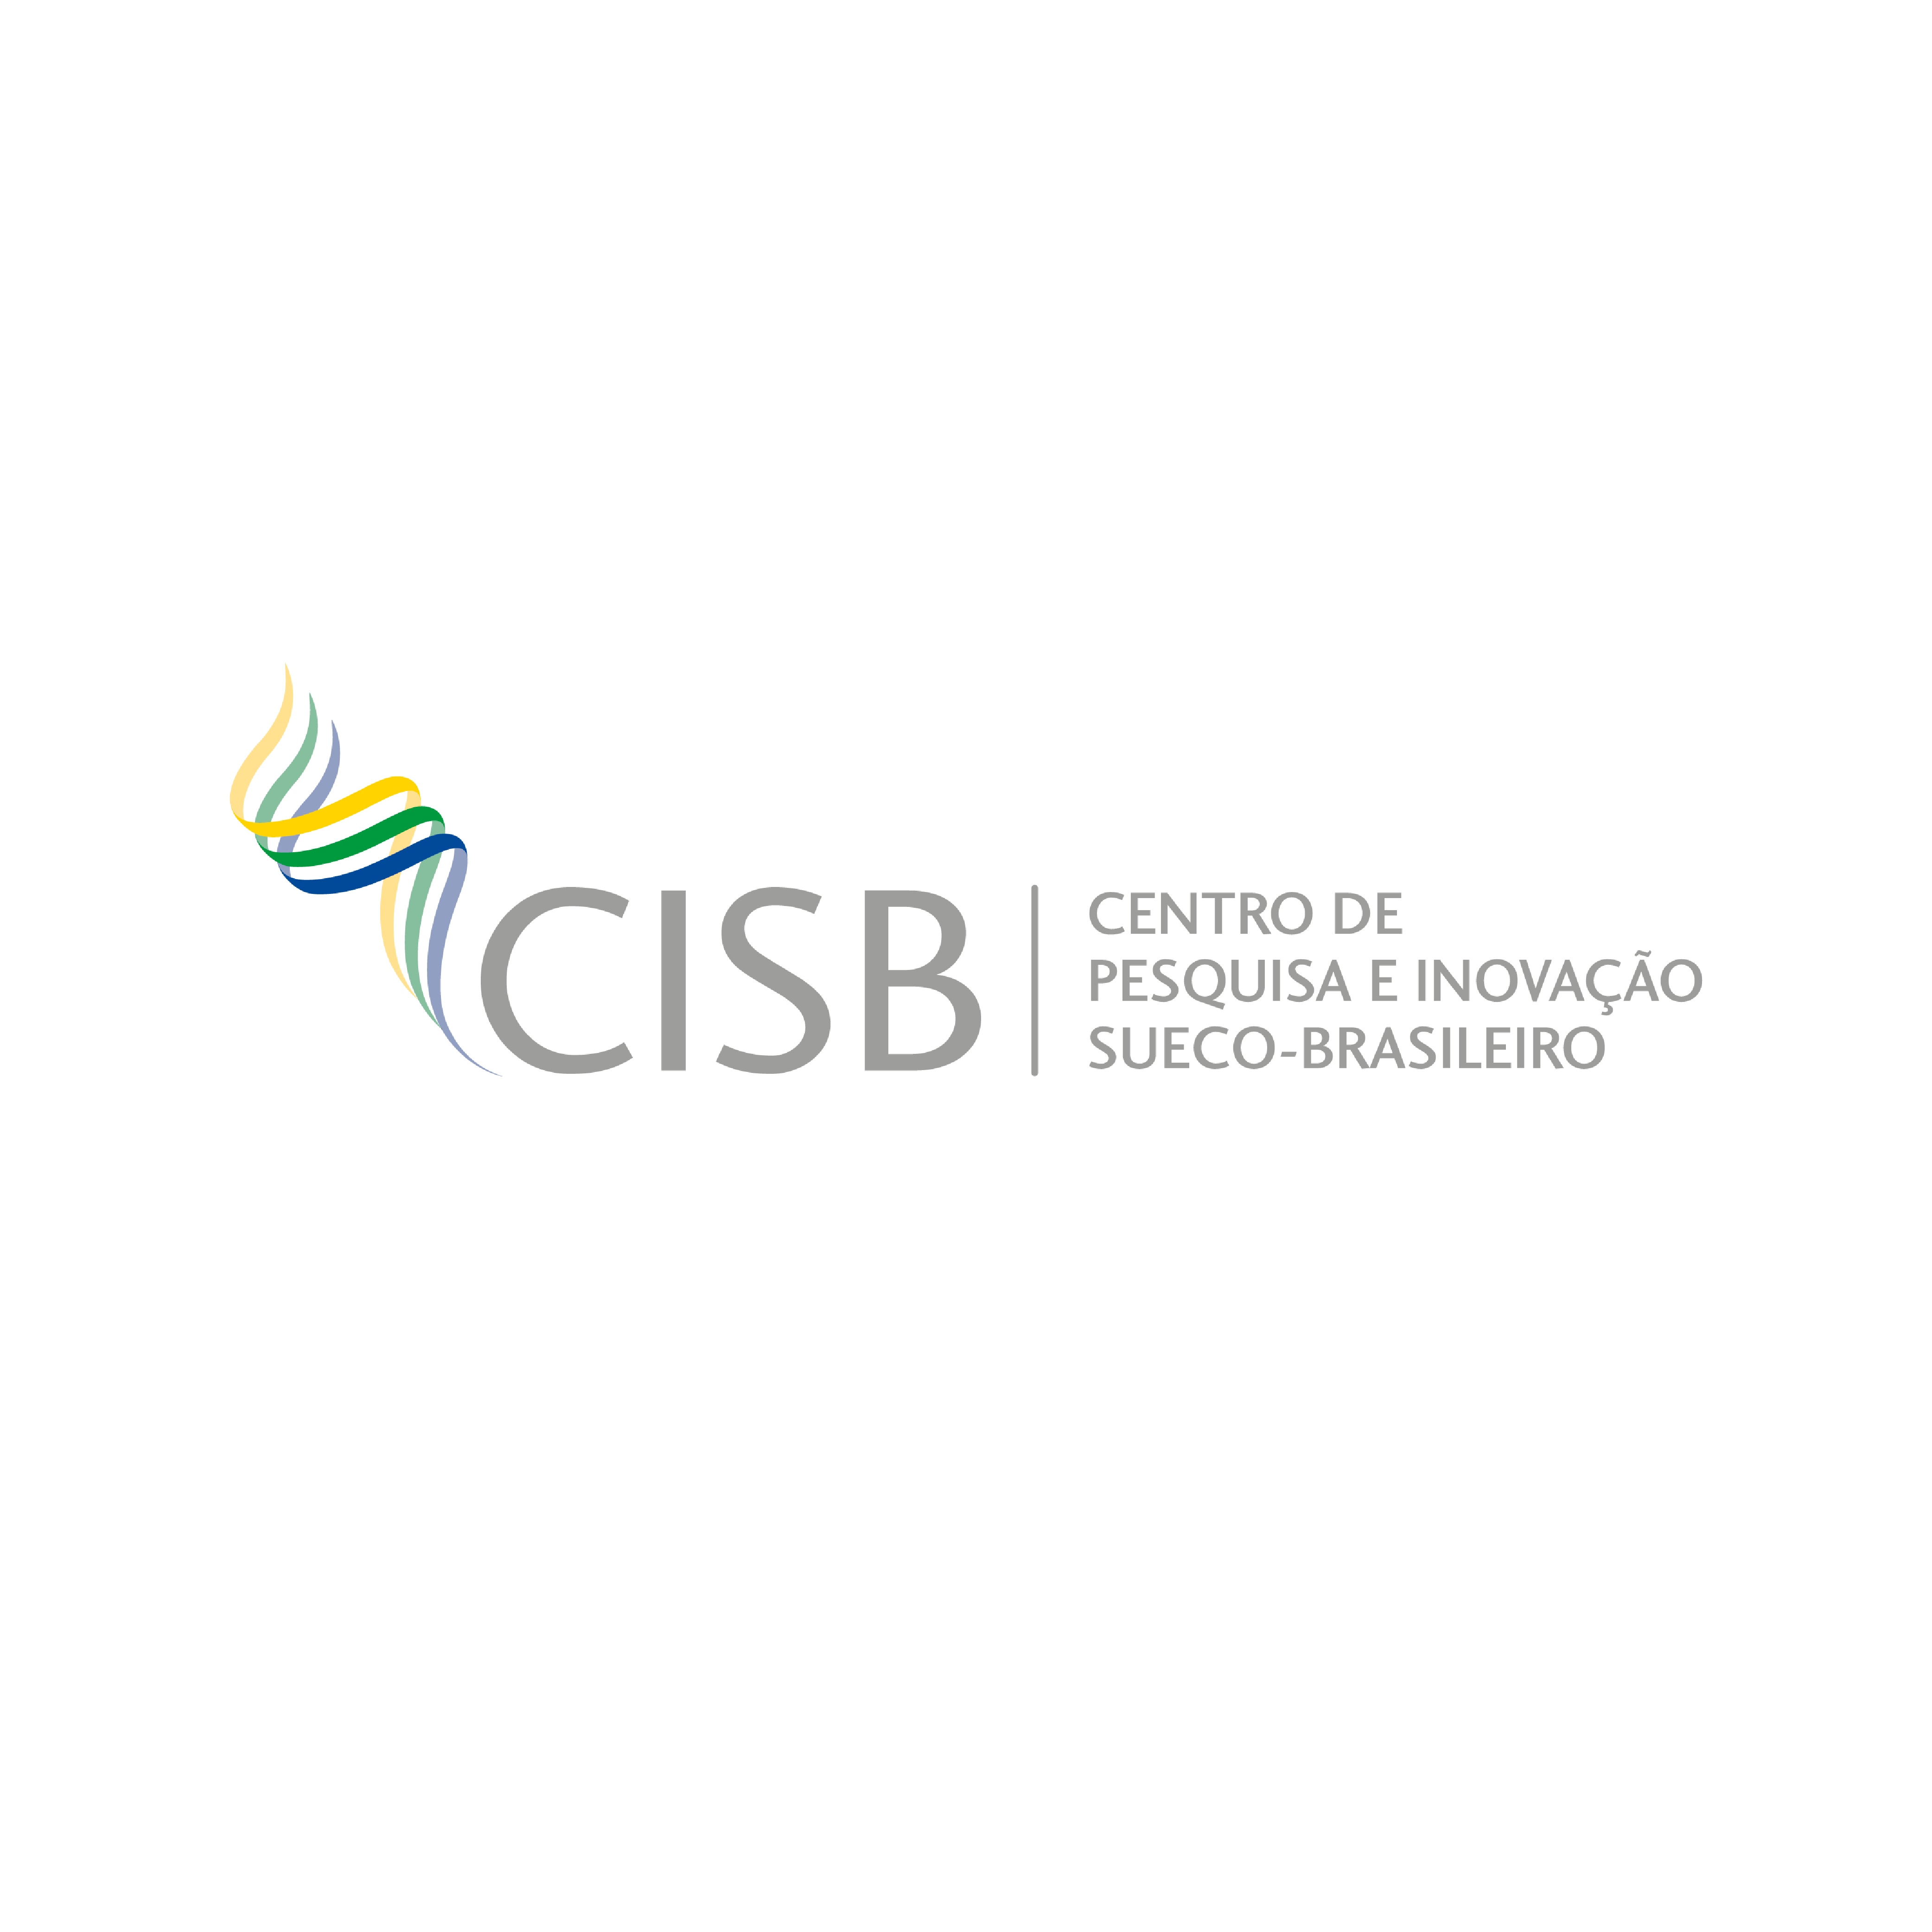 CISB in grey with a green/blue/yellow swirl to the left